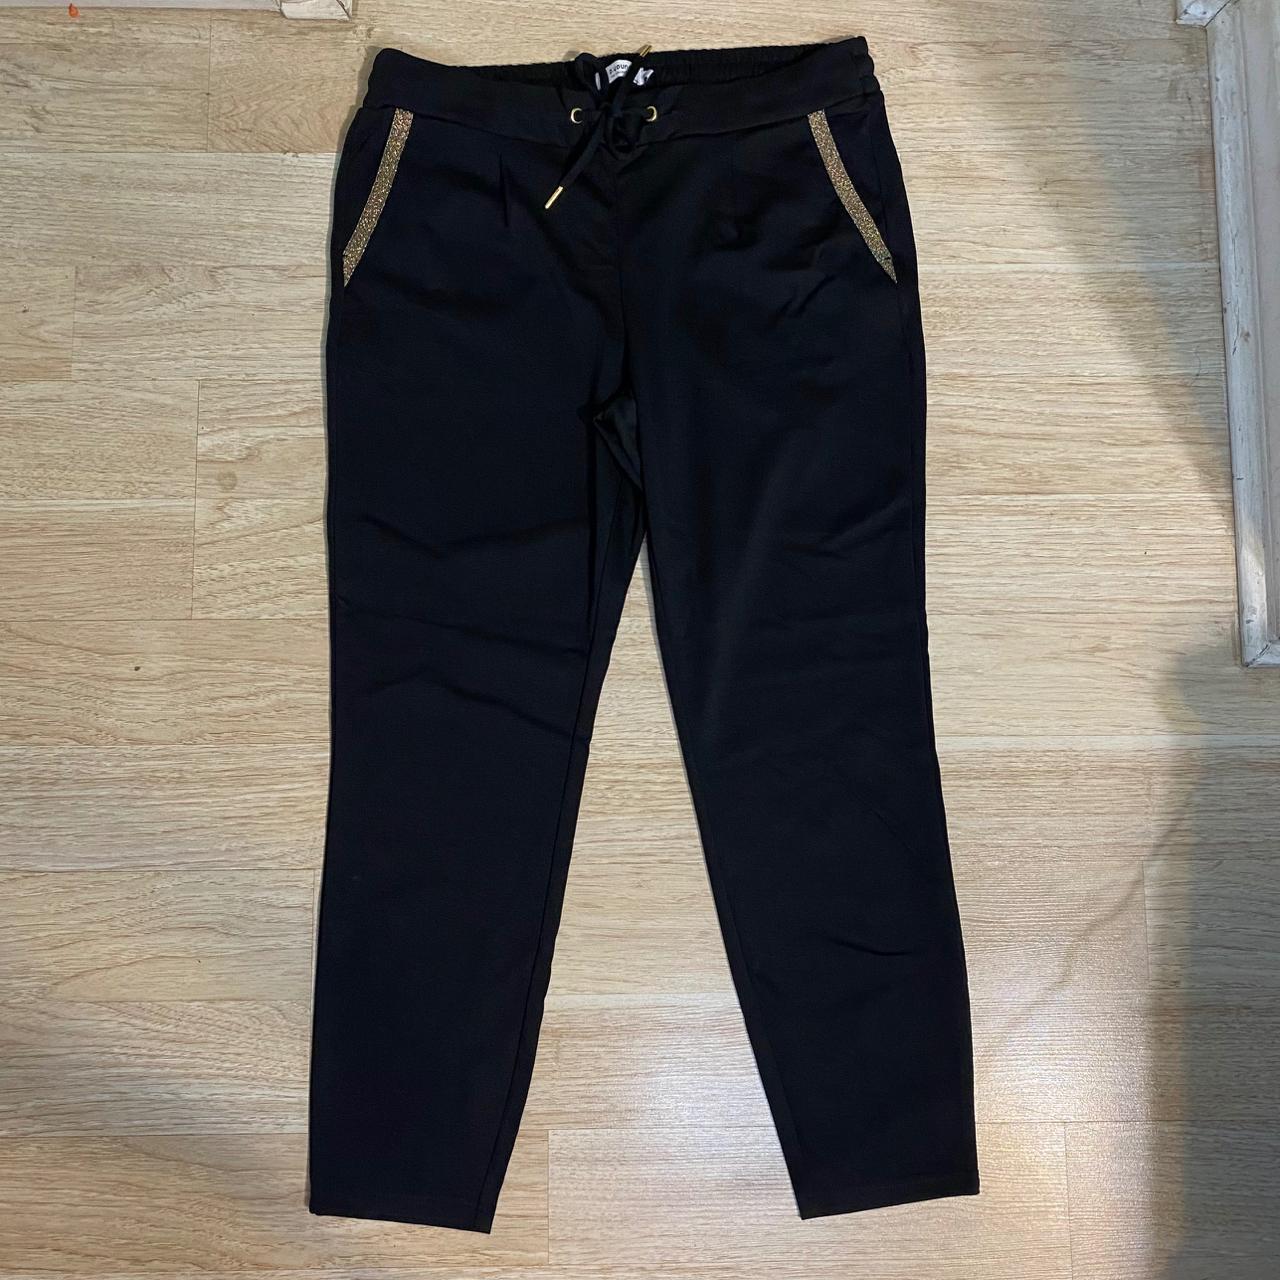 Product Image 2 - b.young
Byrizetta Pants

SIZE: XL
COLOR: Black
MATERIAL: Shell: